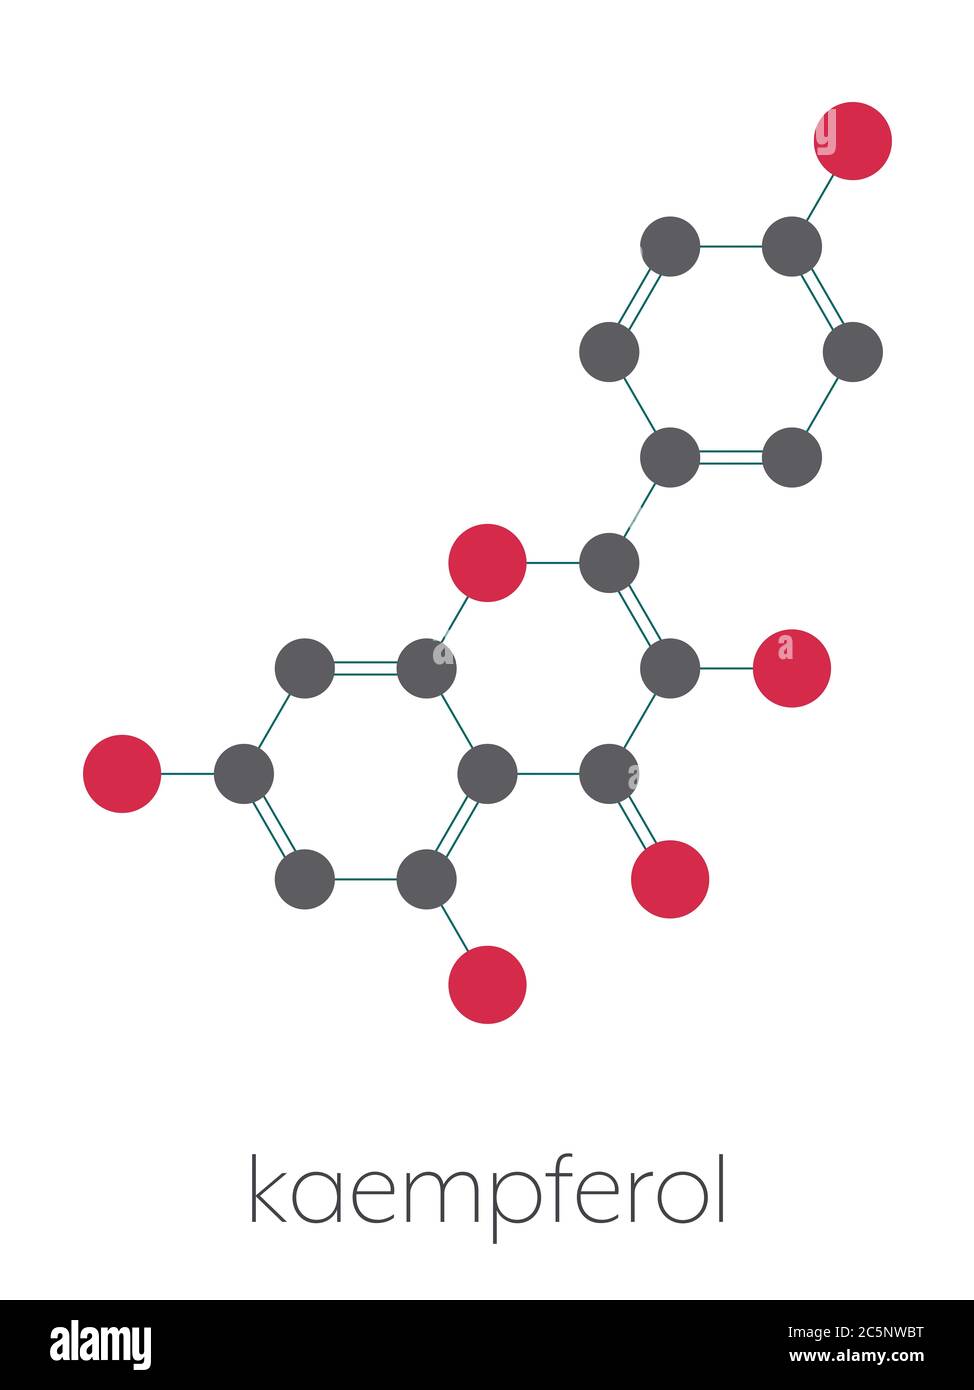 Kaempferol antioxidant molecule. Stylized skeletal formula (chemical structure): Atoms are shown as color-coded circles: hydrogen (hidden), carbon (grey), oxygen (red). Stock Photo